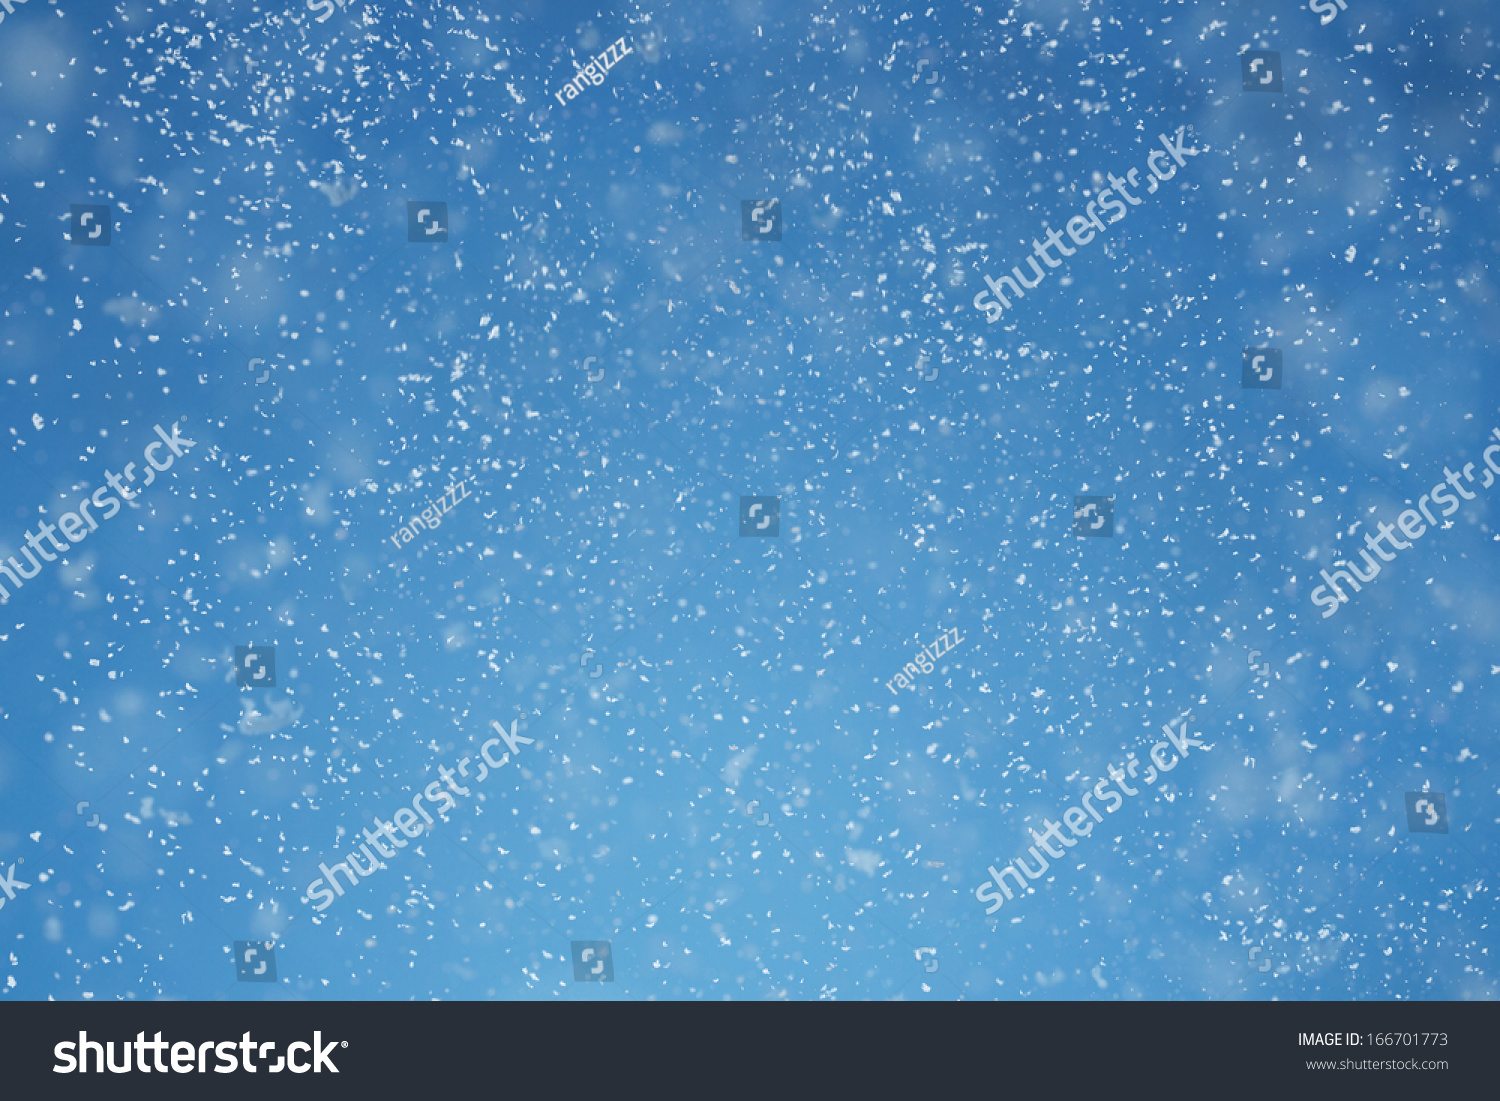 Winter background. Falling snow over blue background with copy space #166701773